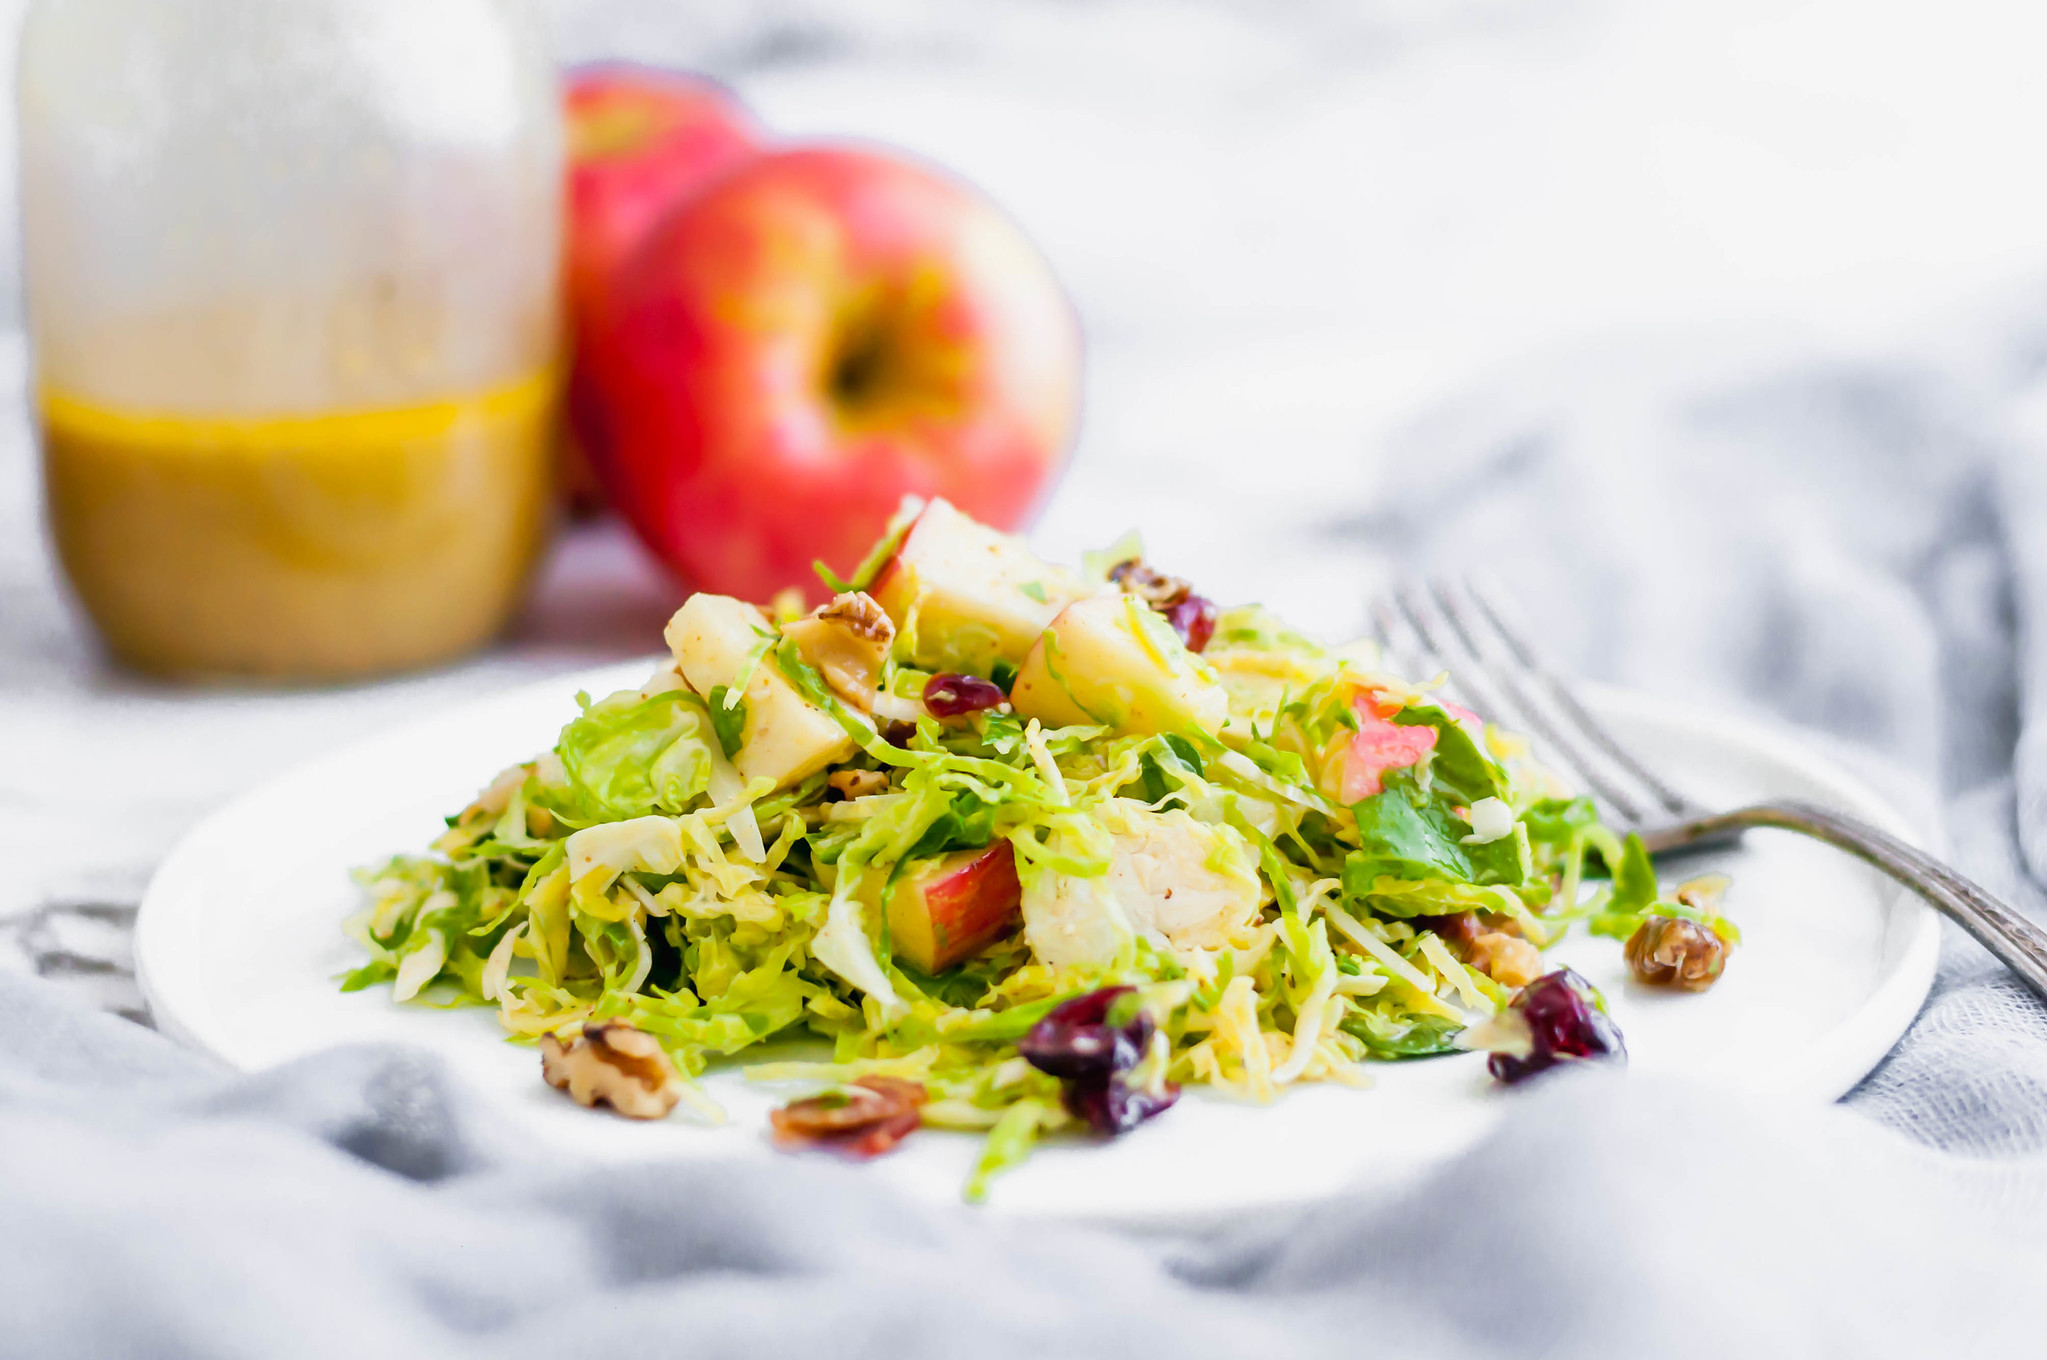 This Shaved Brussels Sprouts Salad is the perfect addition to your Thanksgiving table. It's bringing all the fresh fall vibes. Full of fresh shaved brussels sprouts, honeycrisp apples, craisins, sharp cheddar cheese, toasted walnuts and the most delicious honey mustard vinaigrette. Prepare the ingredients ahead of time and toss together at the last minute for a stress free holiday dinner.